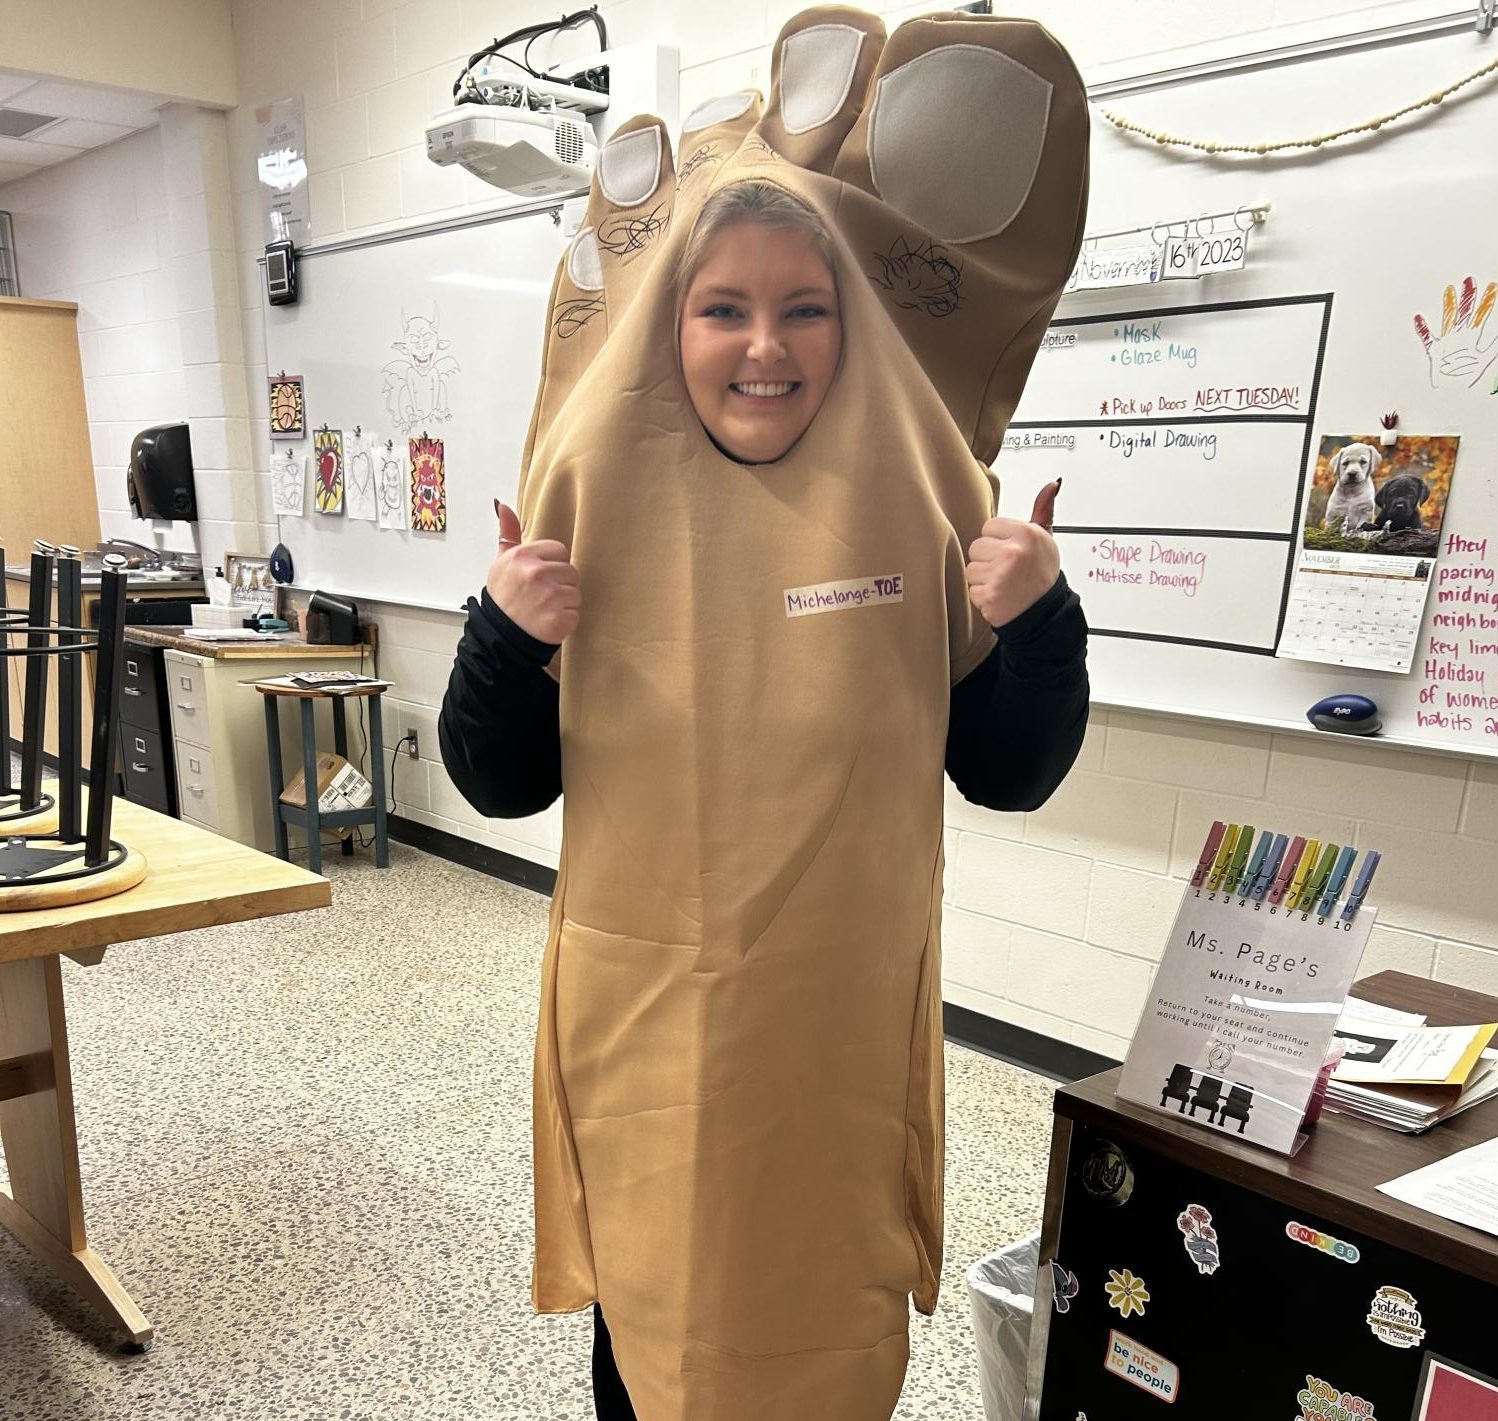 Ms. Page poses in her foot costume after winning the Student Councils food bank donation drive.